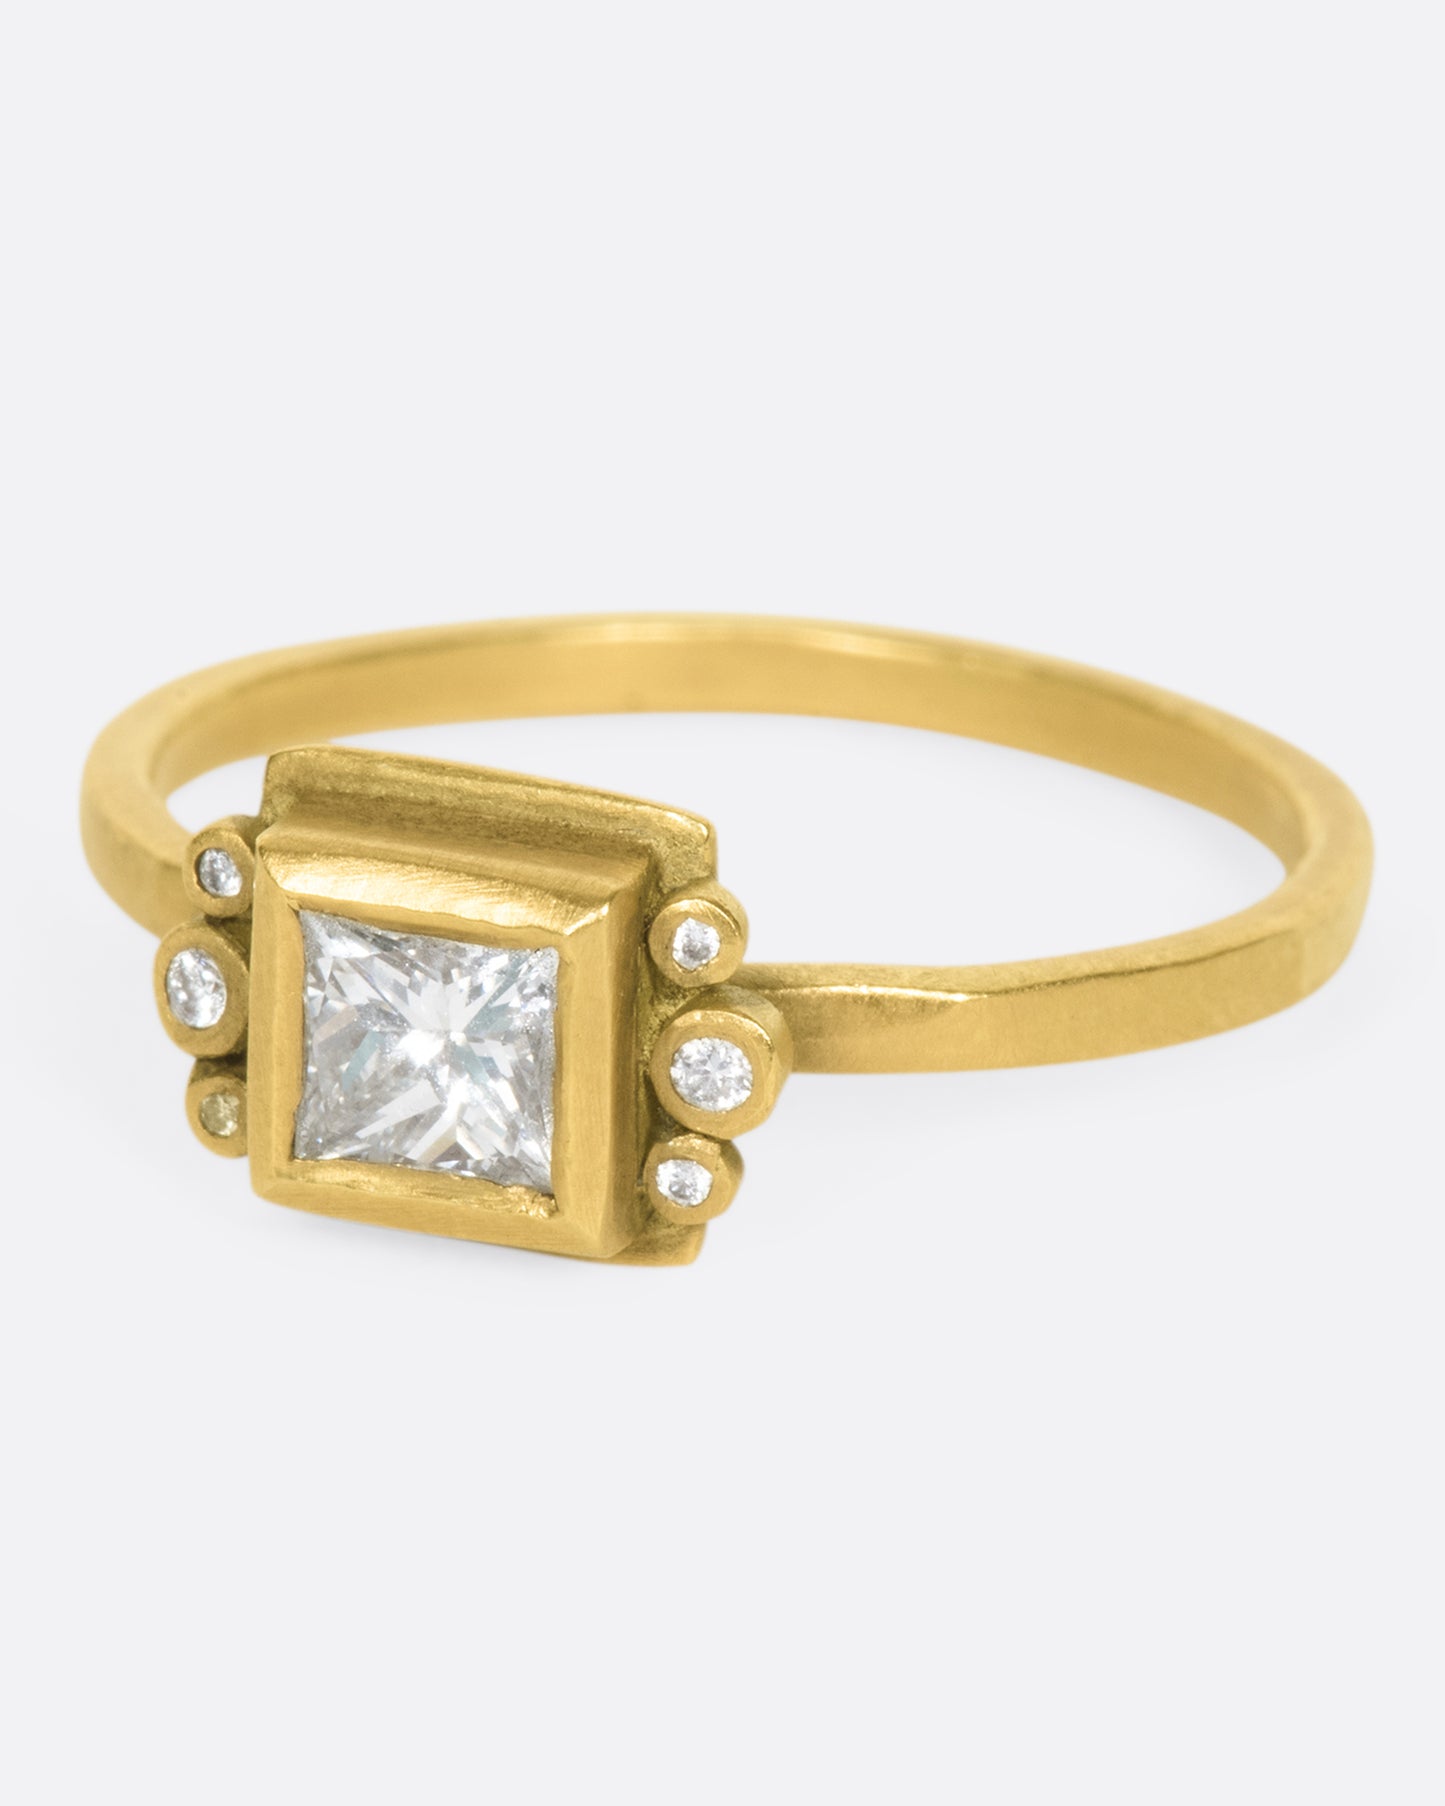 A square diamond in a matching bezel with three round diamonds on either side.